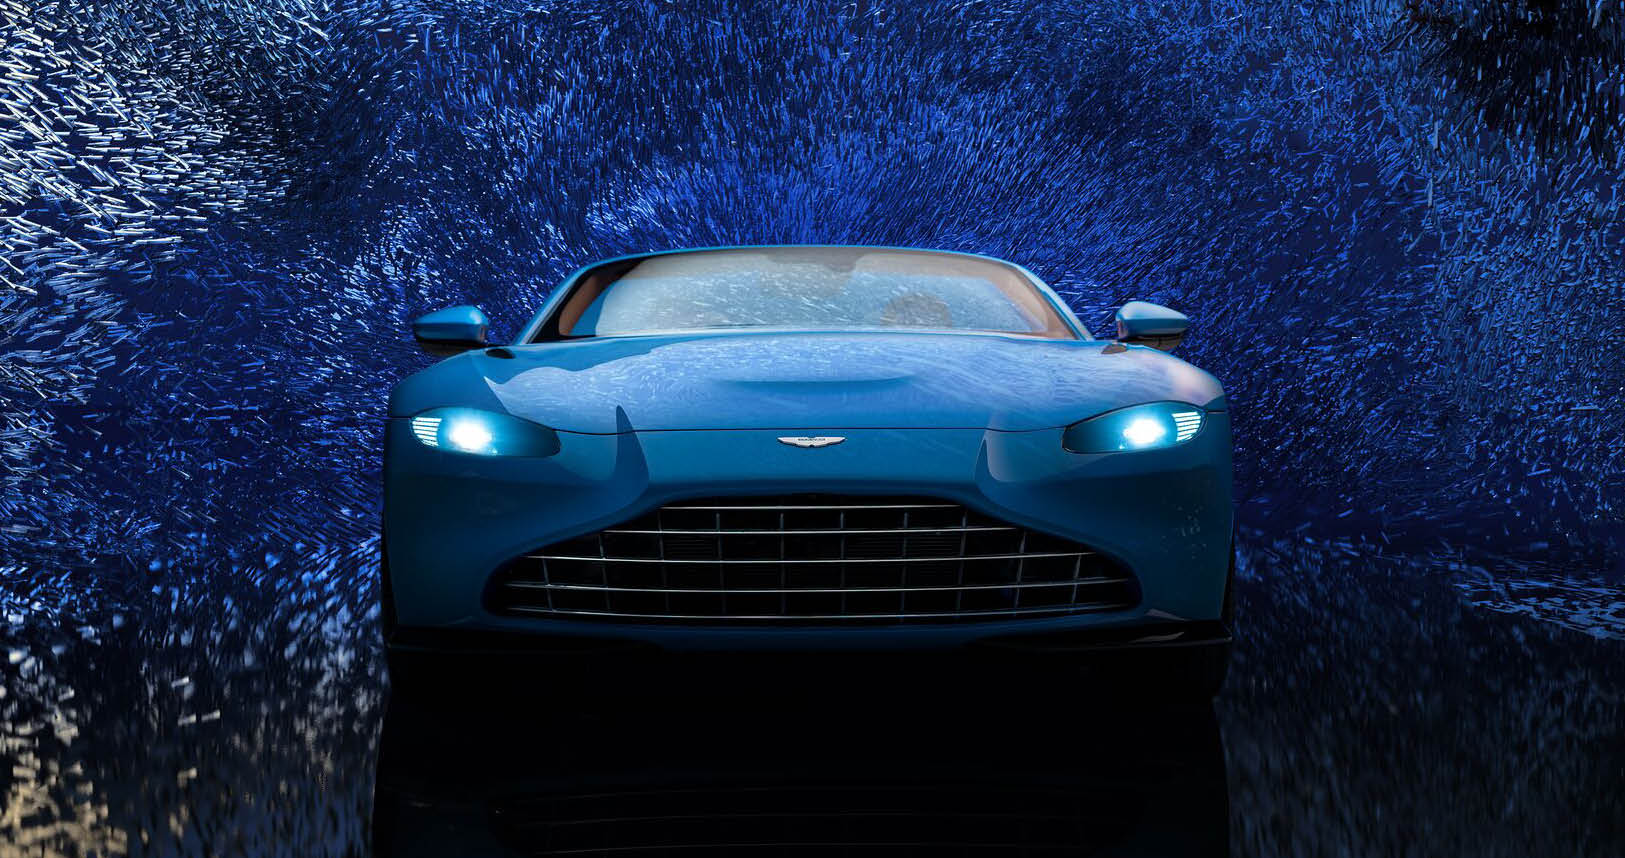 Vantage Roadster Meshed Grille With Ultra Slim LED Headlights